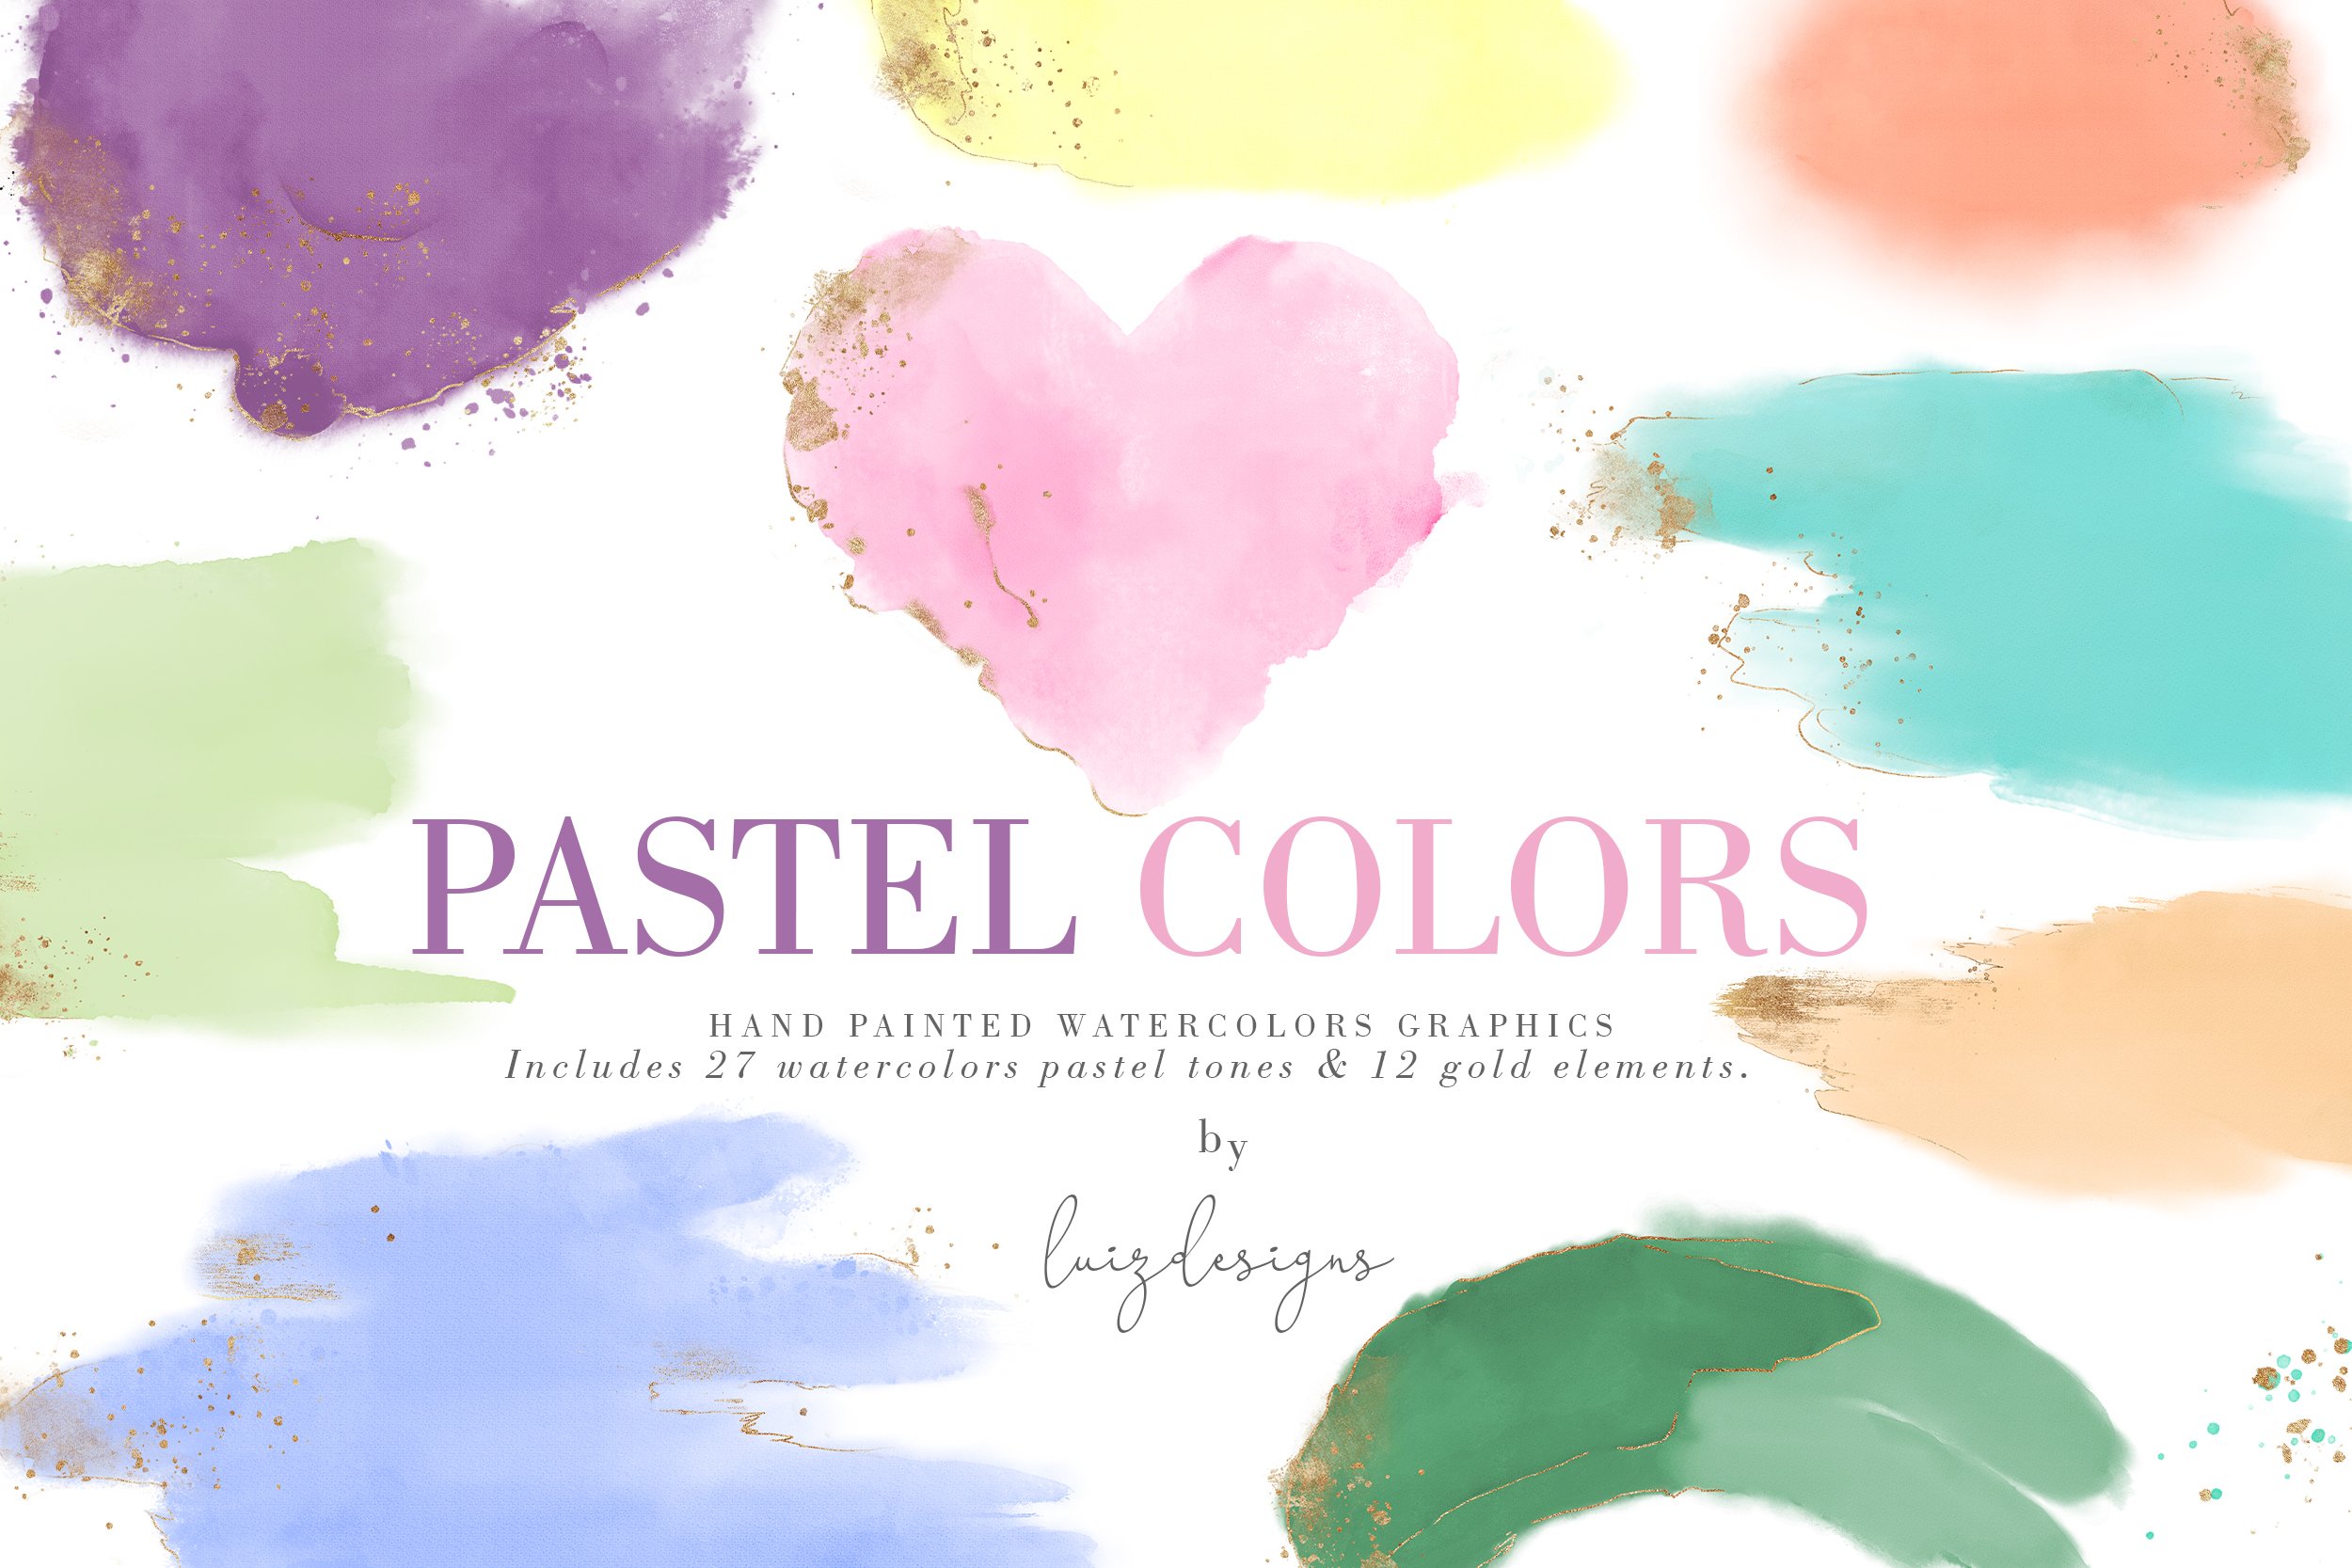 Pastel Colors | Watercolor textures cover image.